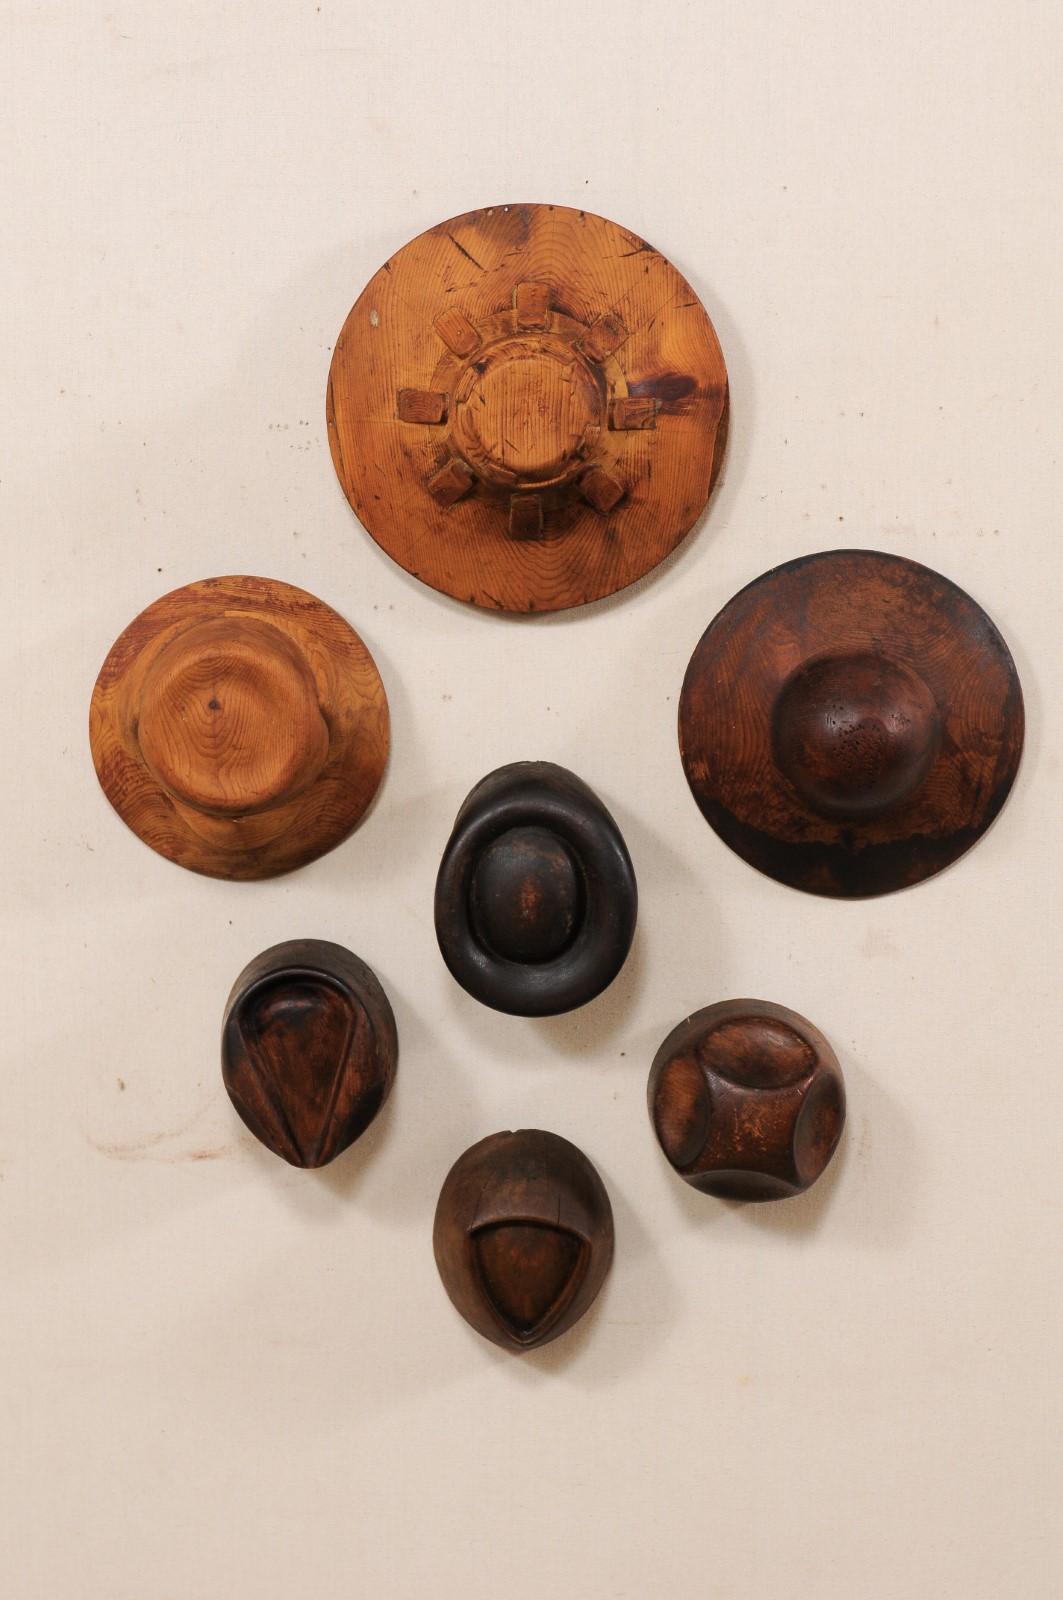 A collection of seven Italian wooden hat maker's forms from the turn of the 19th and 20th century. This set of antique carved wooden hat makers (or milliner's) hat forms from Italy includes seven individual molds, each varying in shape and size.